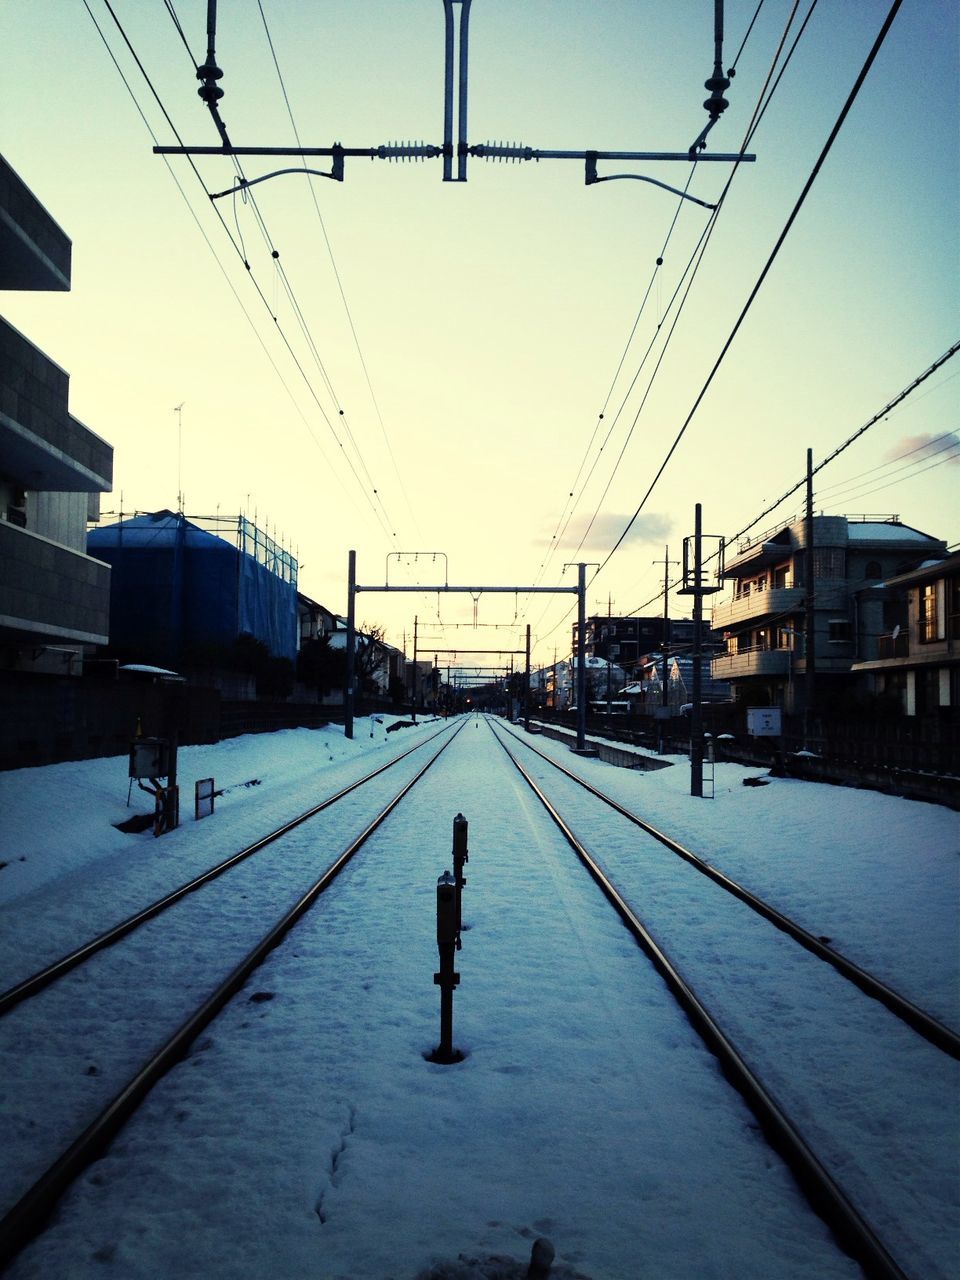 Snow covered railroad tracks against sky in city